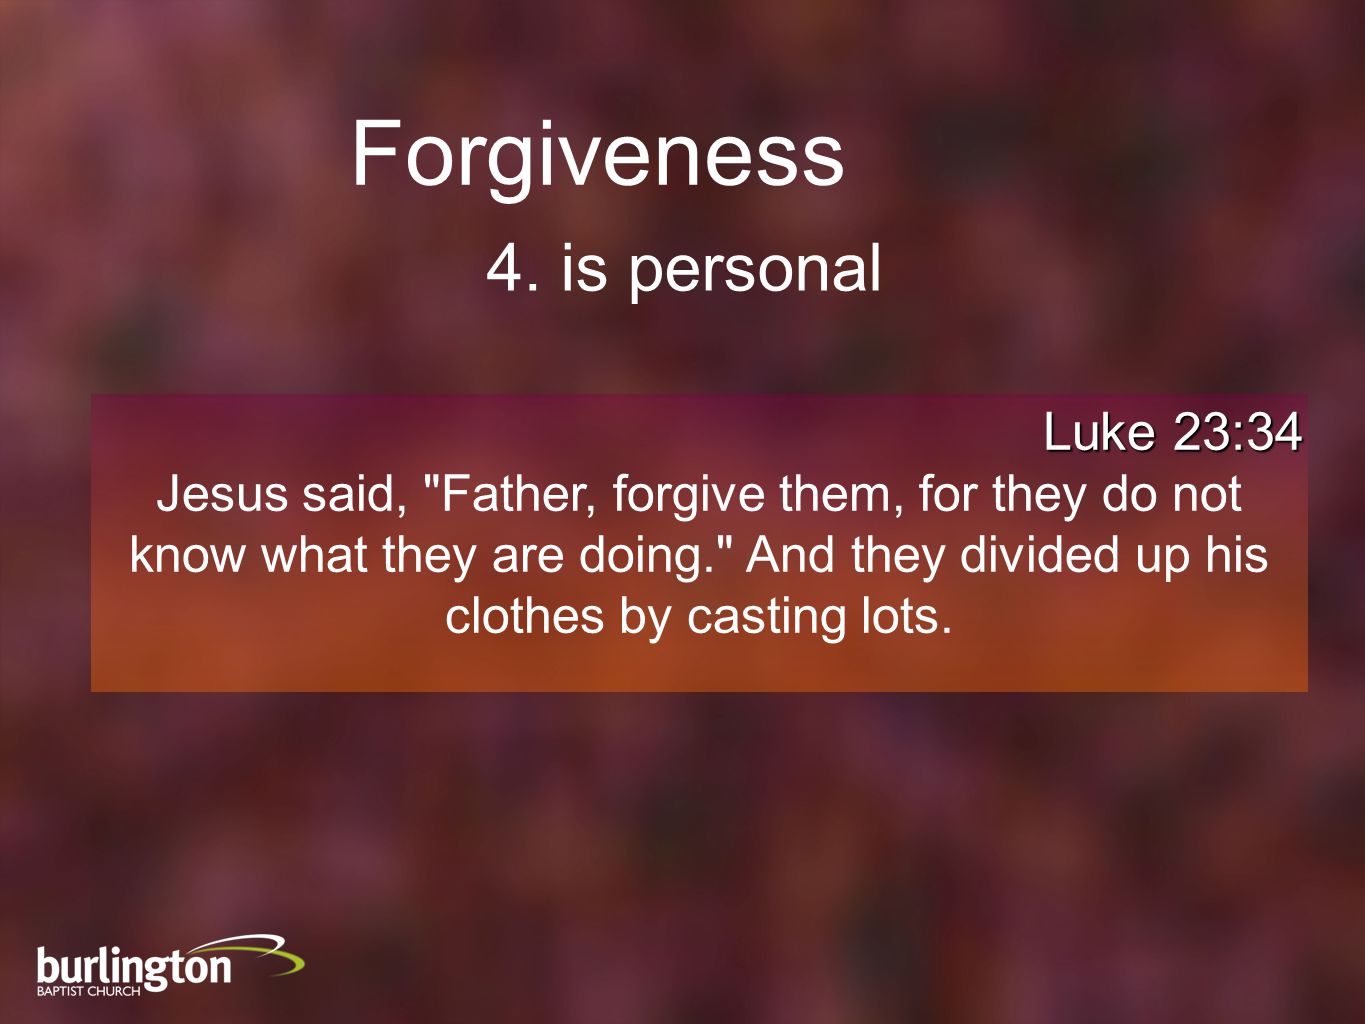 Luke 23:34 Jesus said, Father, forgive them, for they do not know what they are doing. And they divided up his clothes by casting lots.